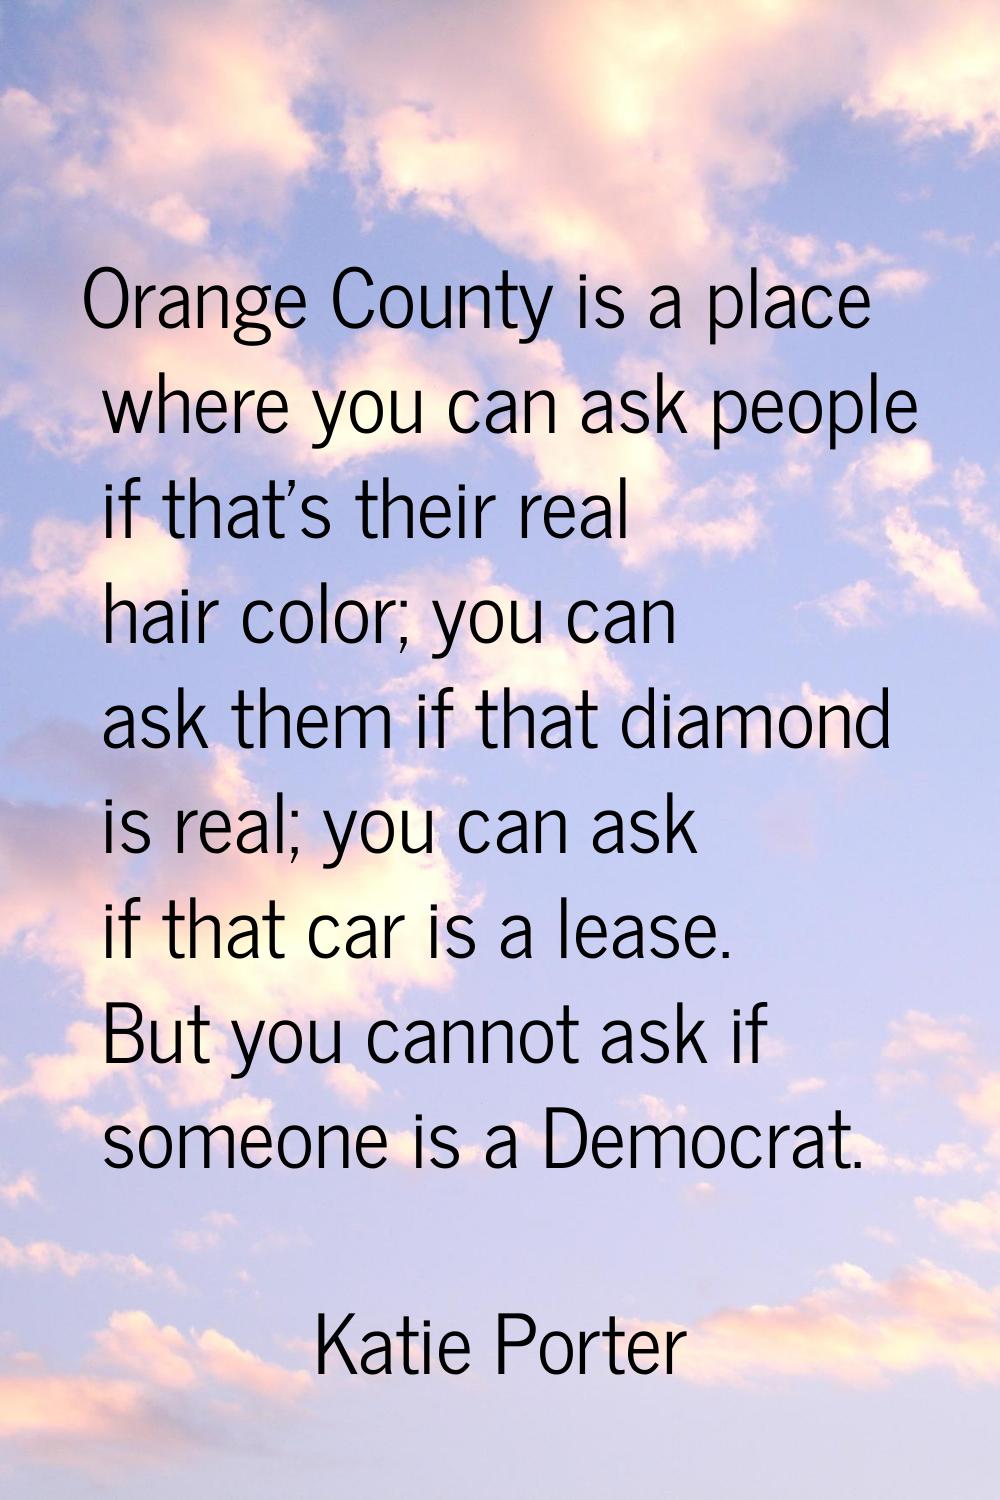 Orange County is a place where you can ask people if that's their real hair color; you can ask them